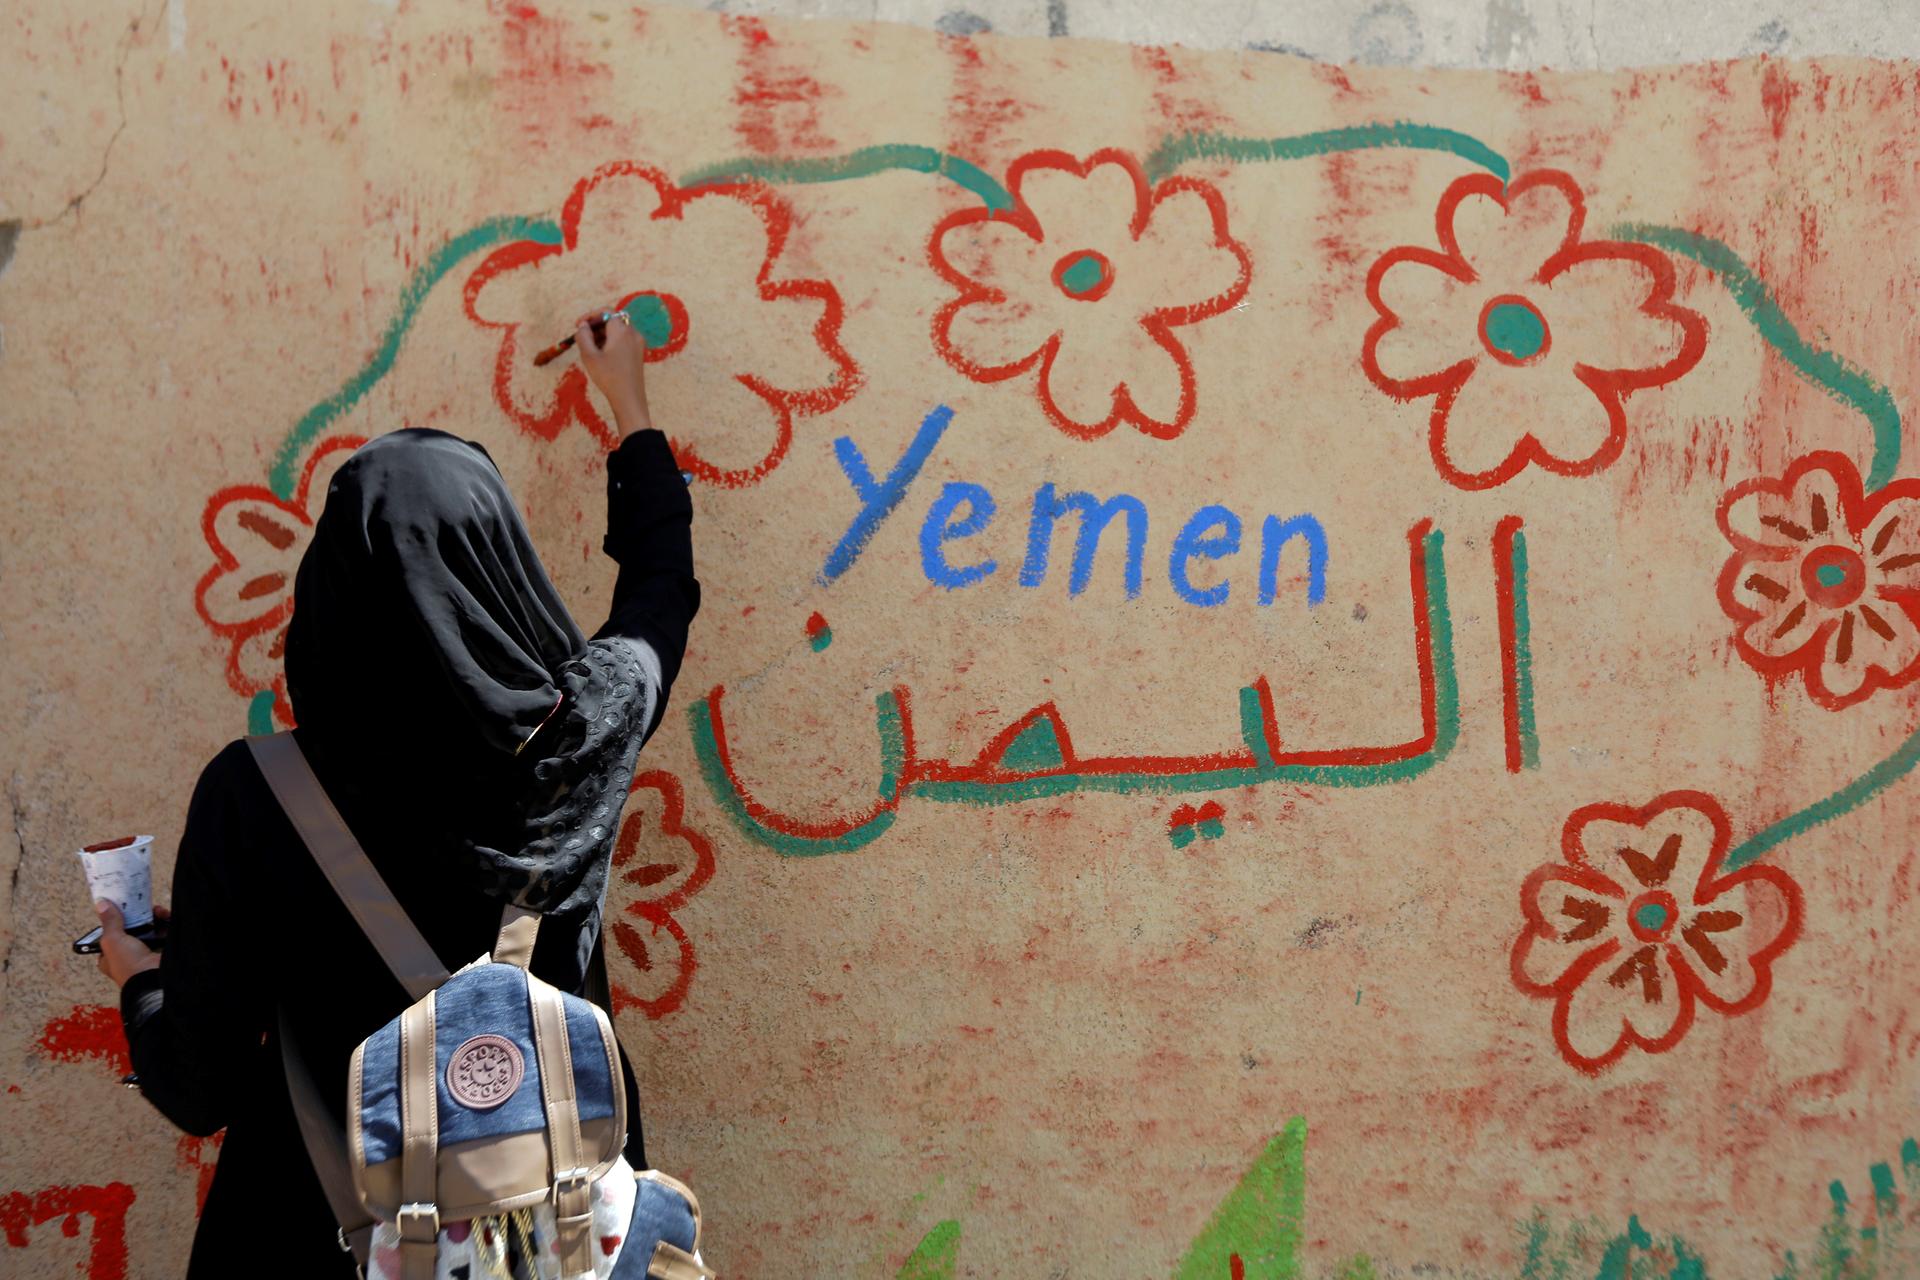 A woman takes part in a graffiti painting campaign on a wall in Sanaa, Yemen 